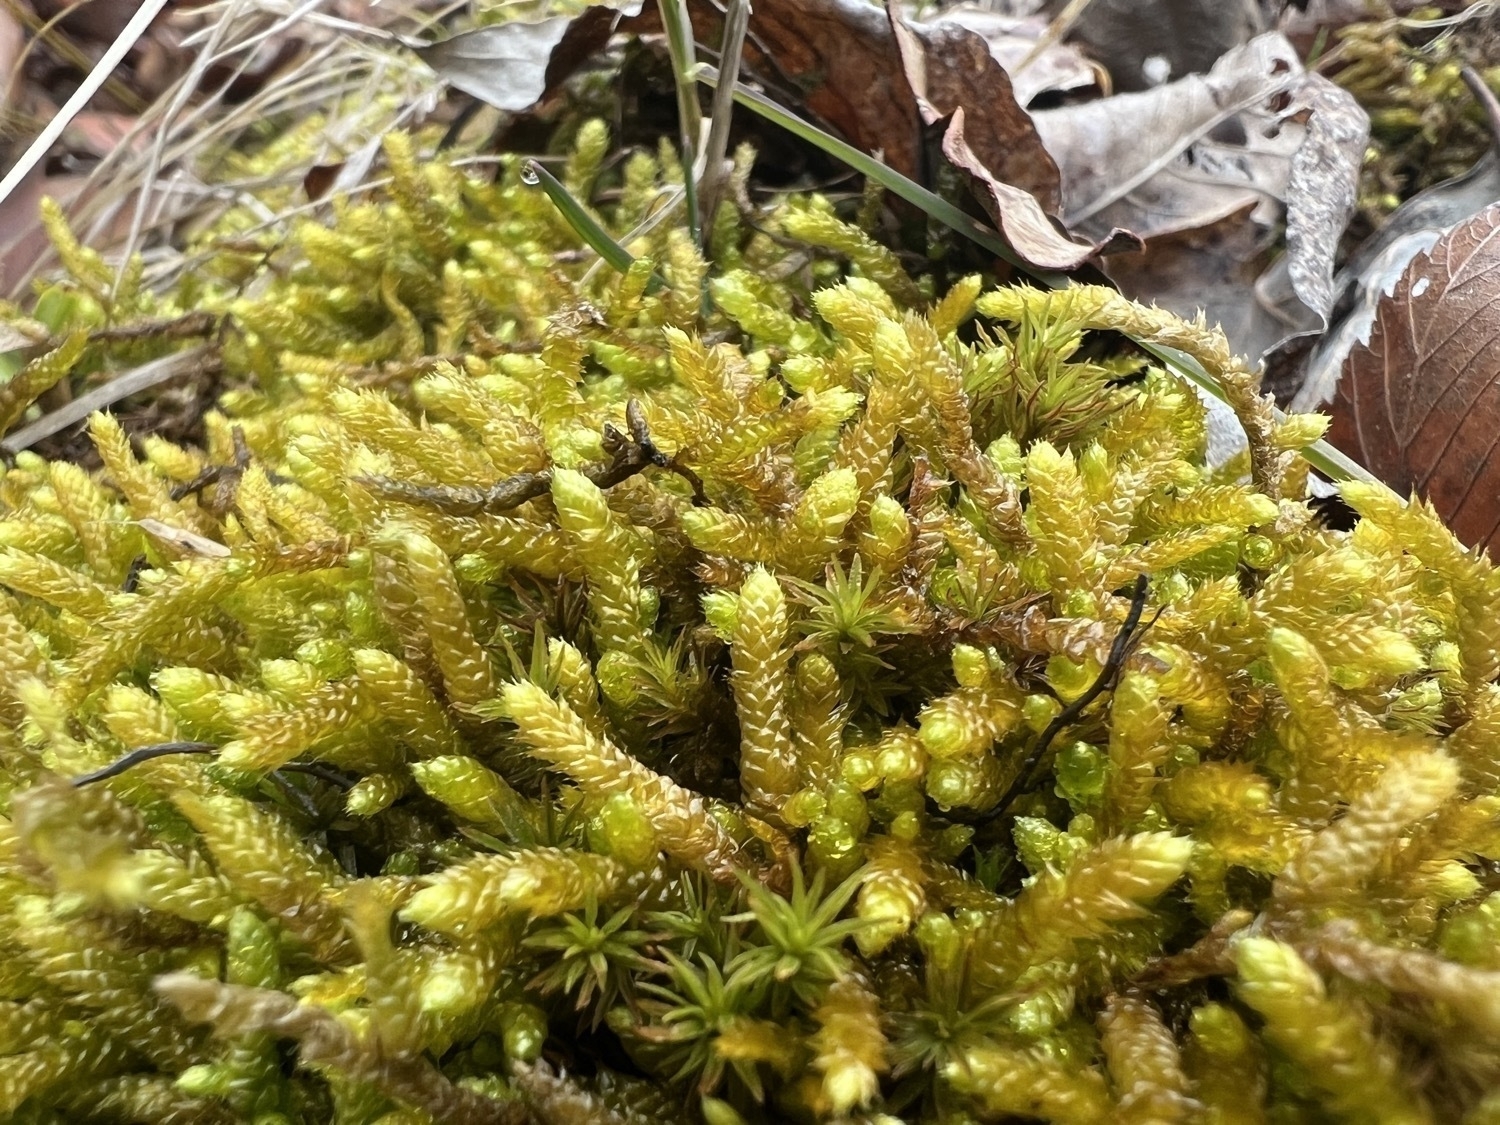 A close-up image of green moss that consists of cedar-like tendrils with an orange tint.